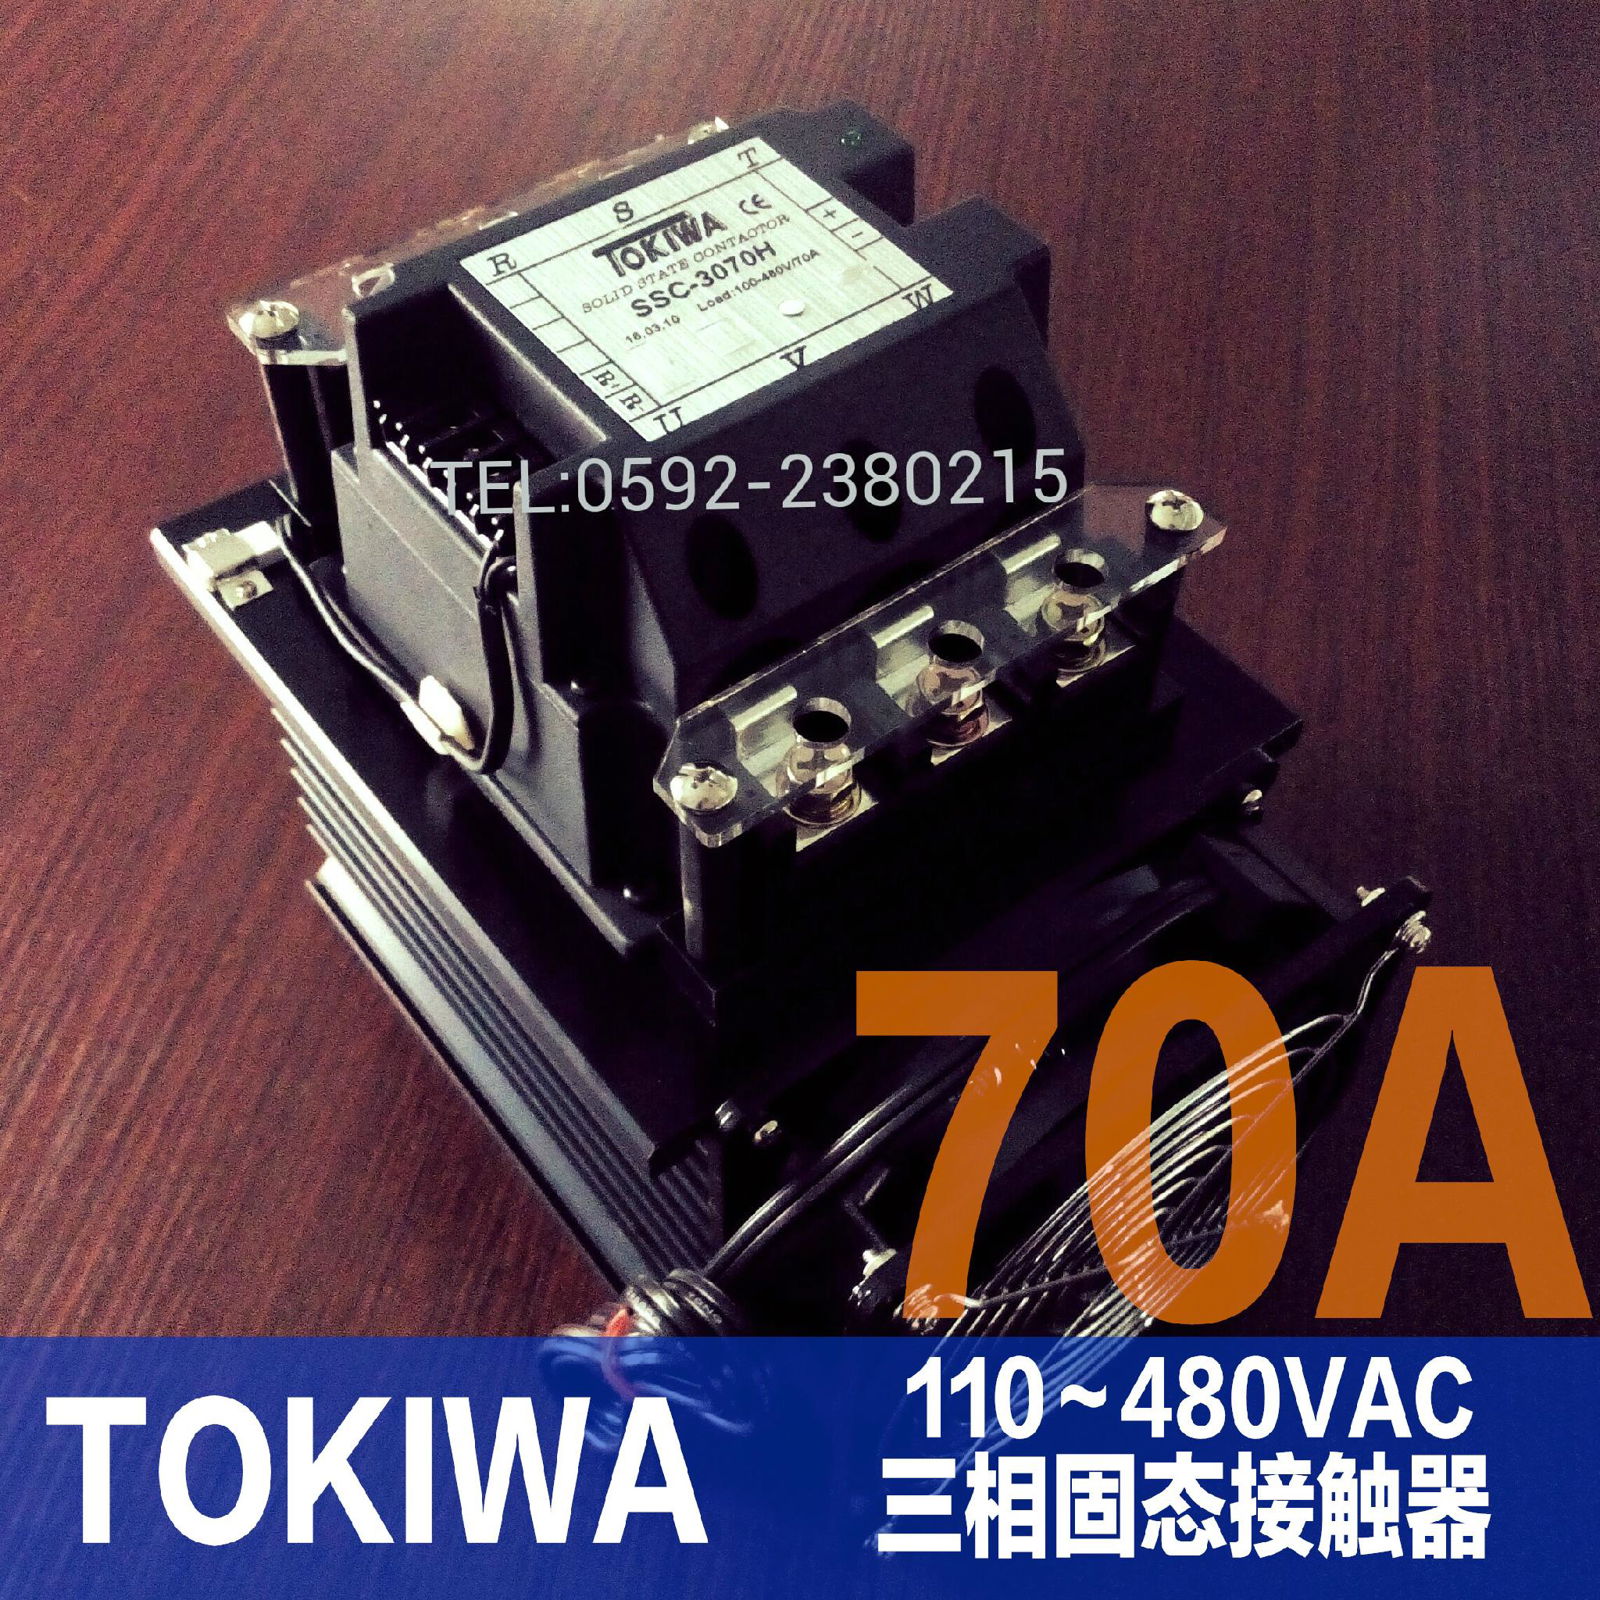 TOKIWA SSC-3070H solid state contactor Three-phase solid state relay 3